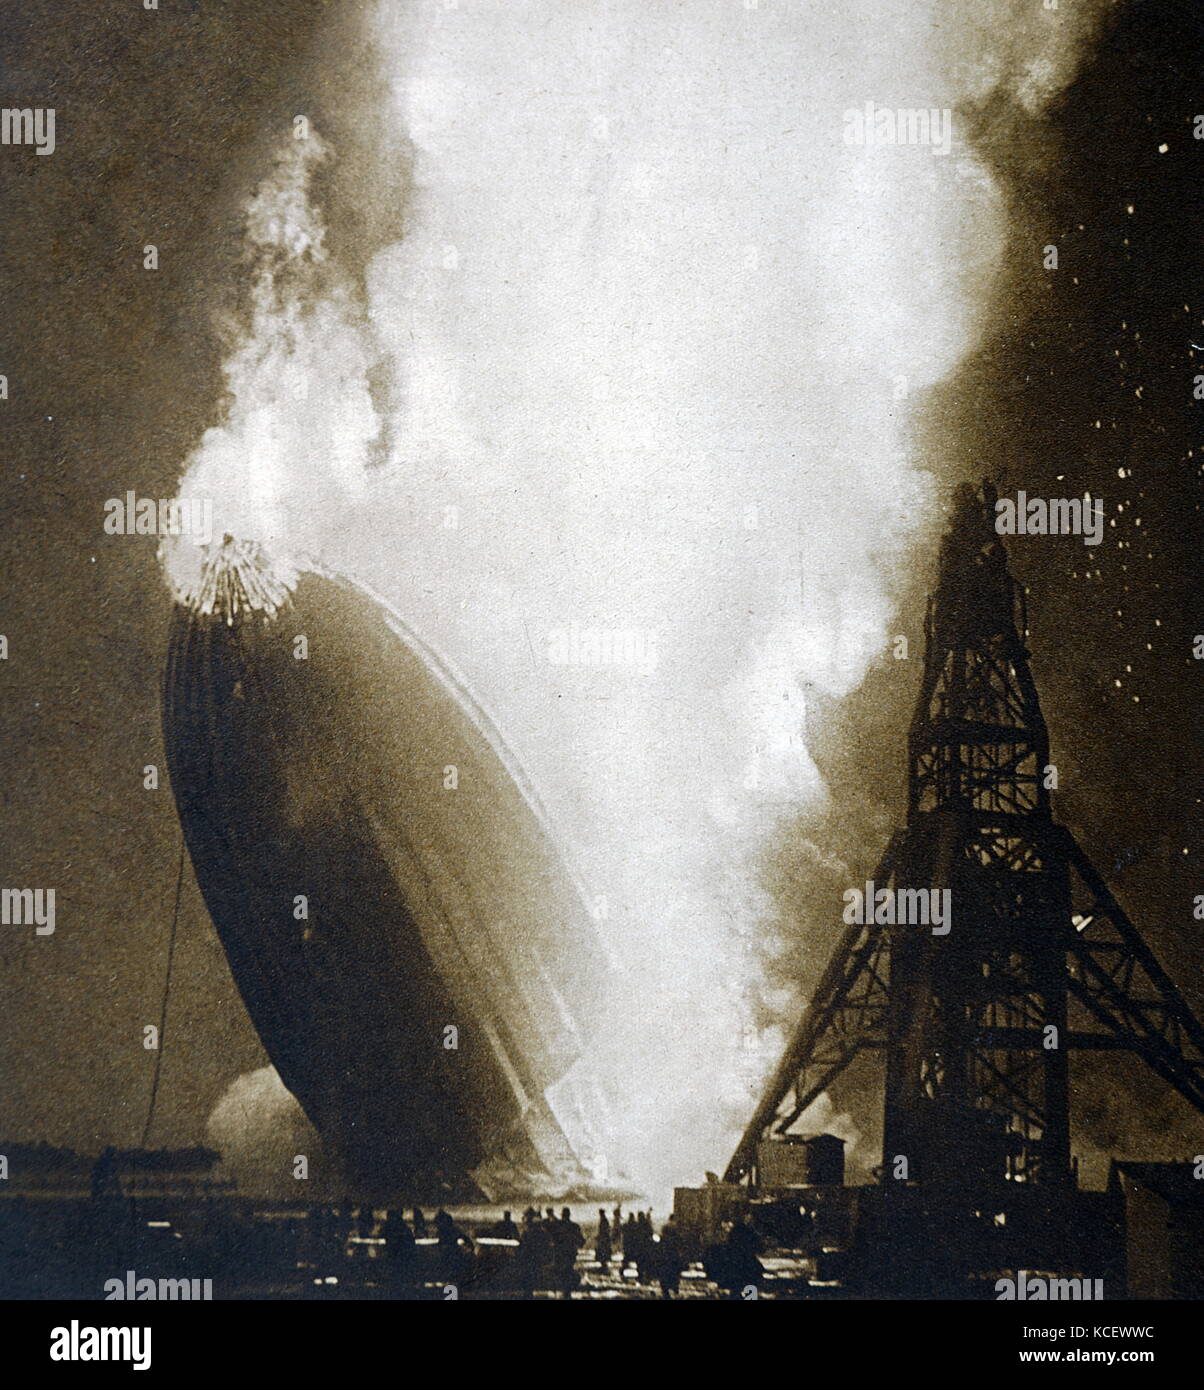 Photograph taken during the Hindenburg disaster. A German passenger airship LZ 129 Hindenburg caught fire and was destroyed whilst attempting to dock at the Naval Air Station Lakehurst. Dated 20th Century Stock Photo